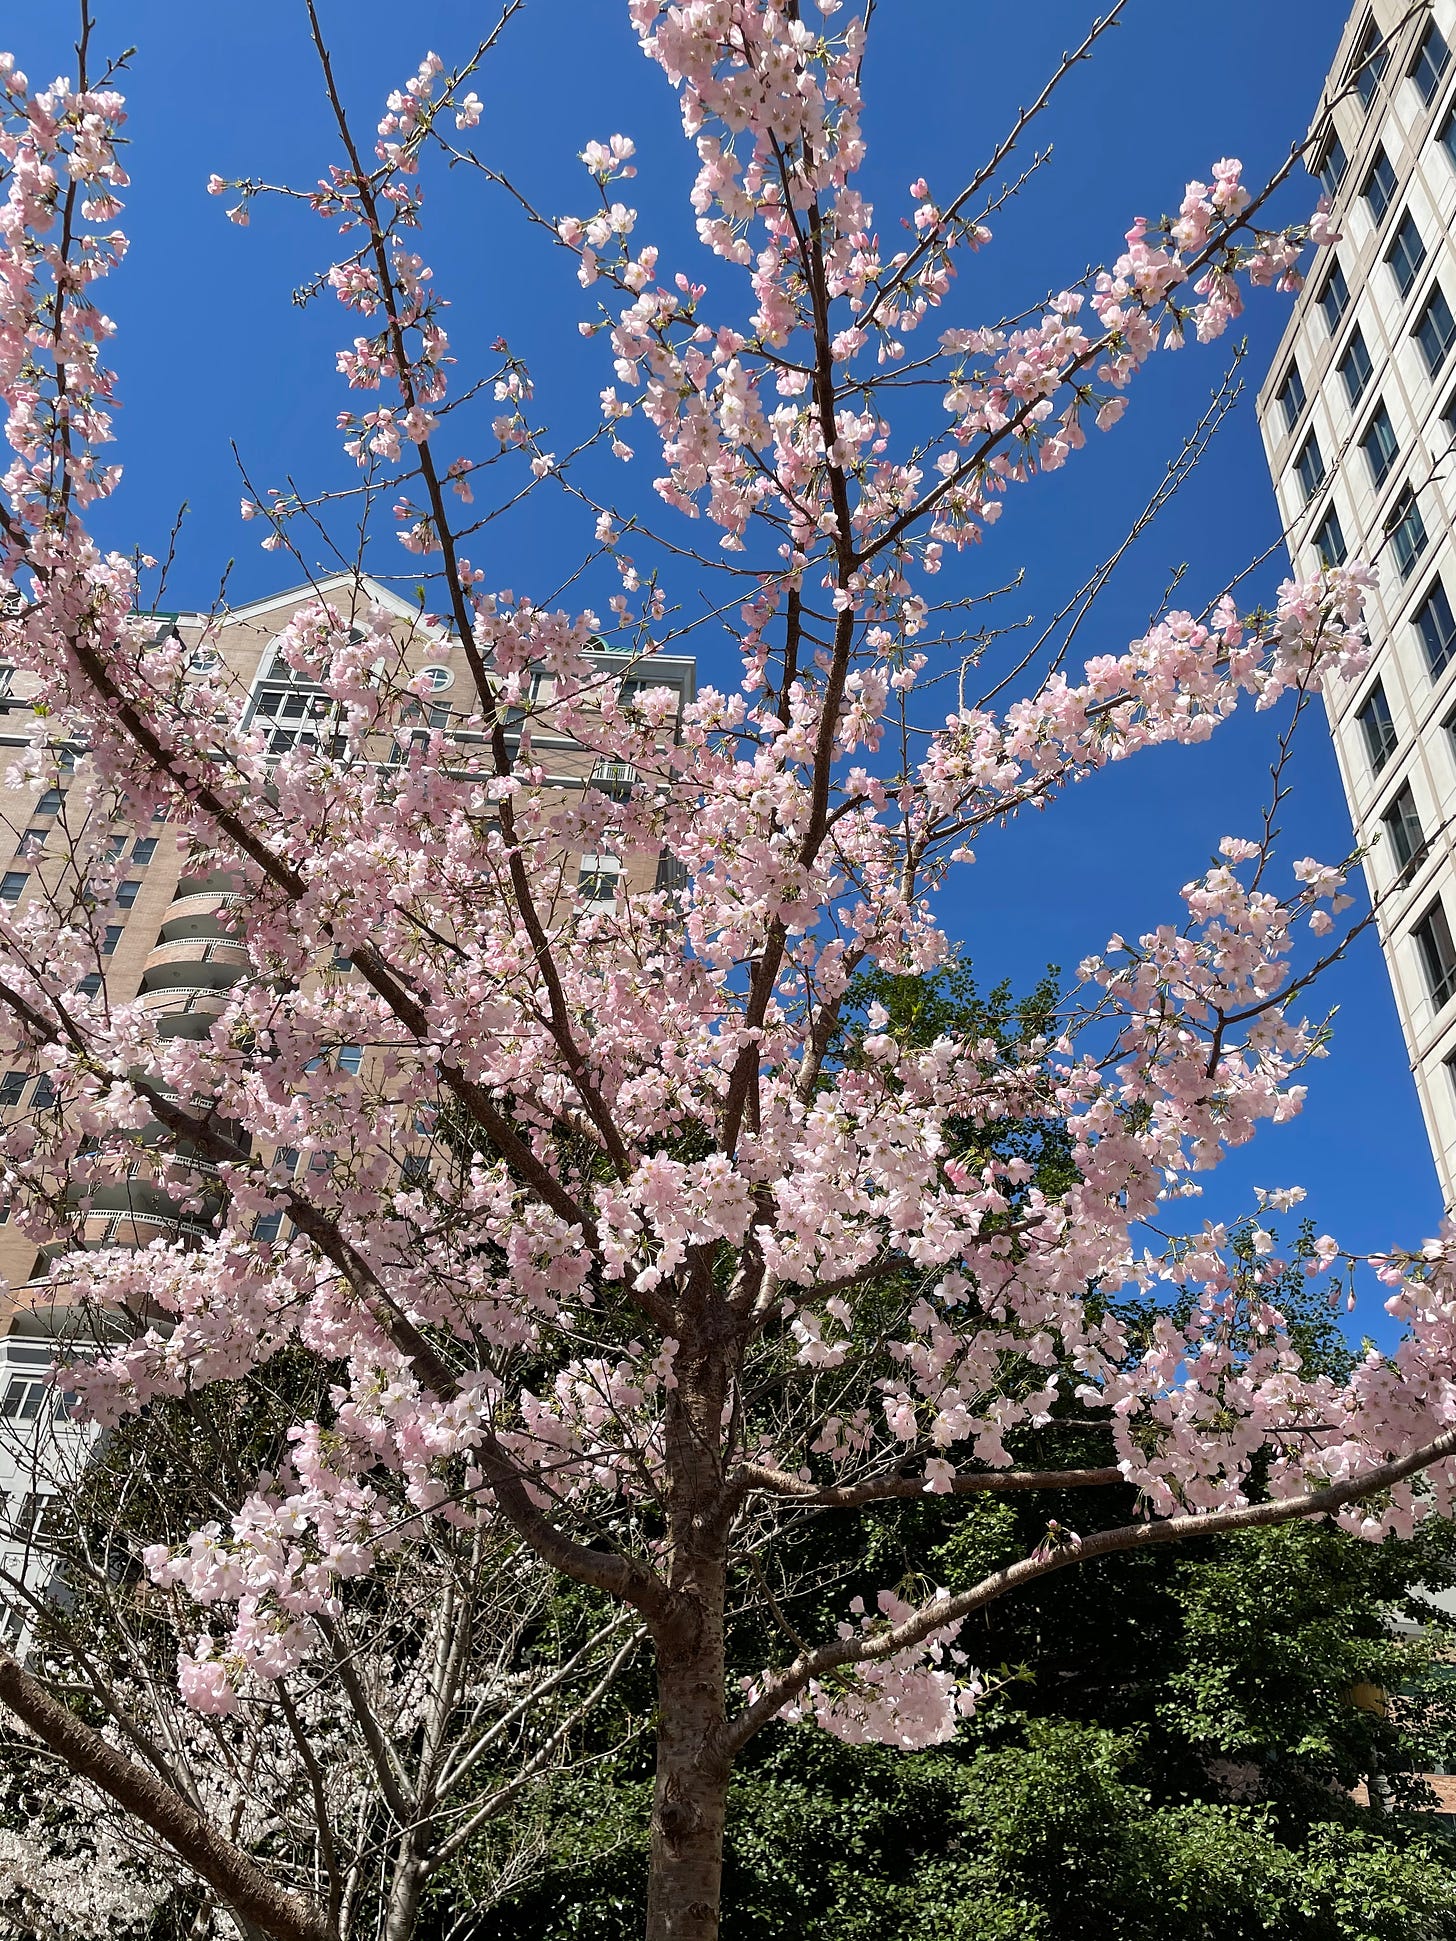 An image of a cherry tree in full blossom with pink puffy flowers